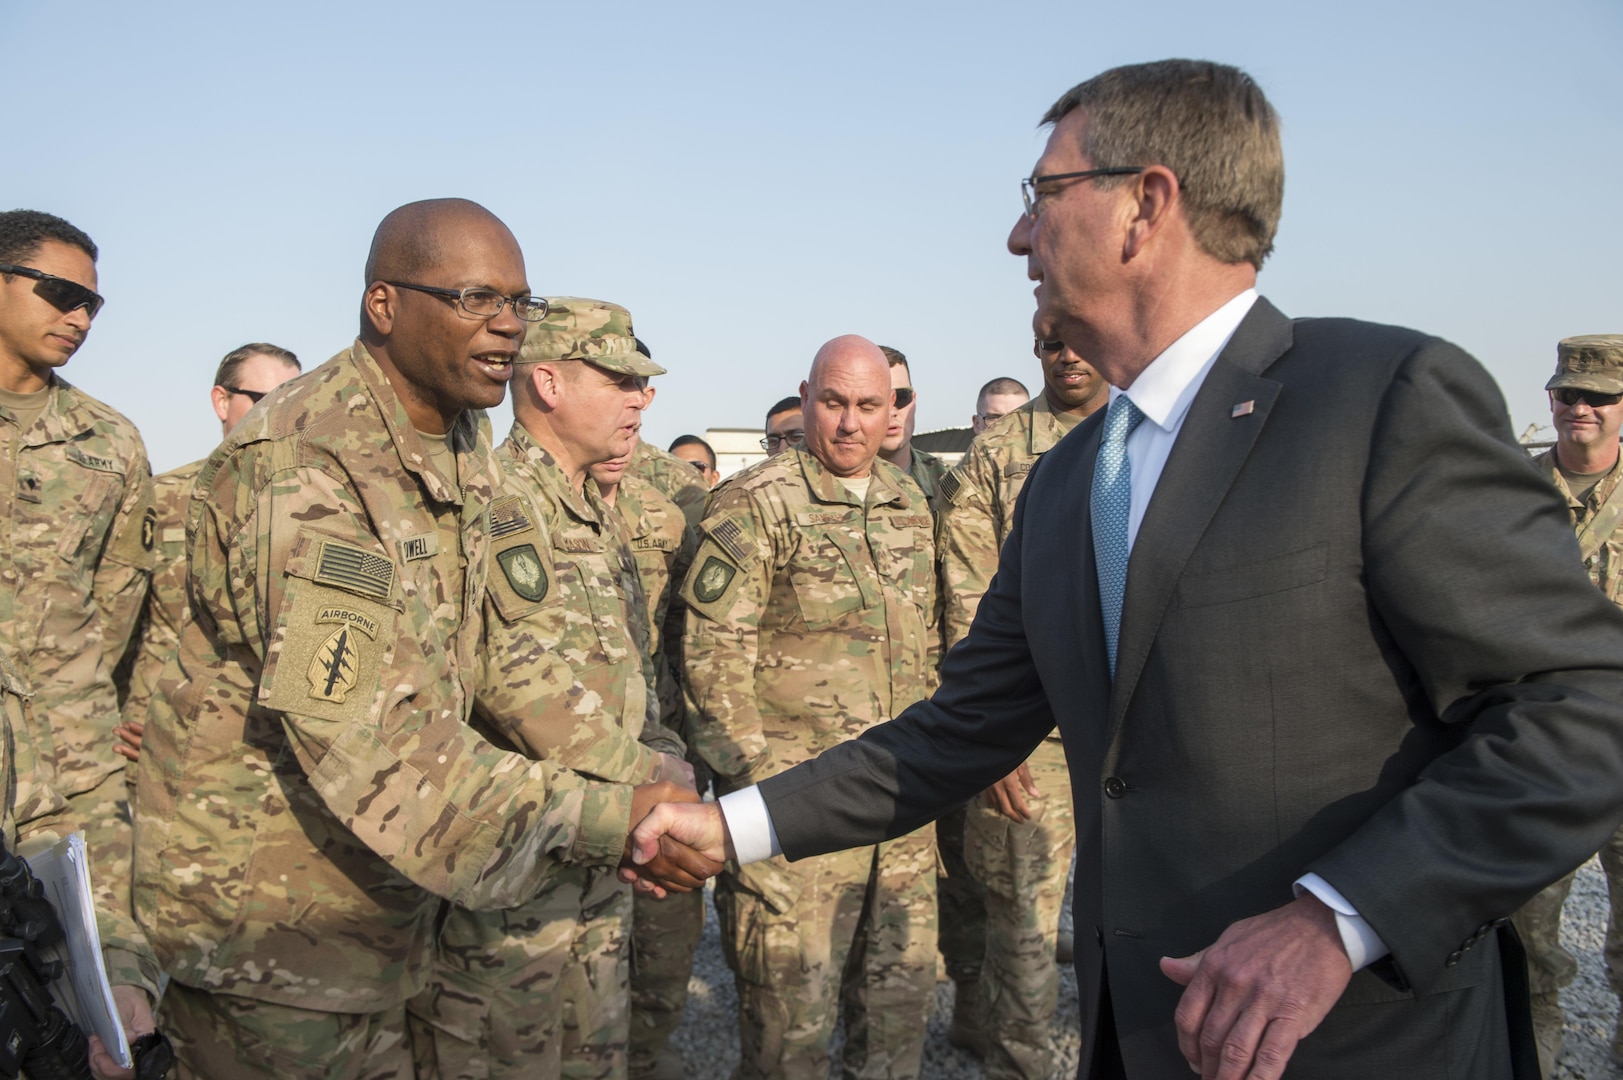 Secretary of Defense Ash Carter talks with members of the 101st Airborne Division in Erbil, Iraq, Oct. 23, 2016. (DoD photo by U.S. Air Force Tech. Sgt. Brigitte N. Brantley)